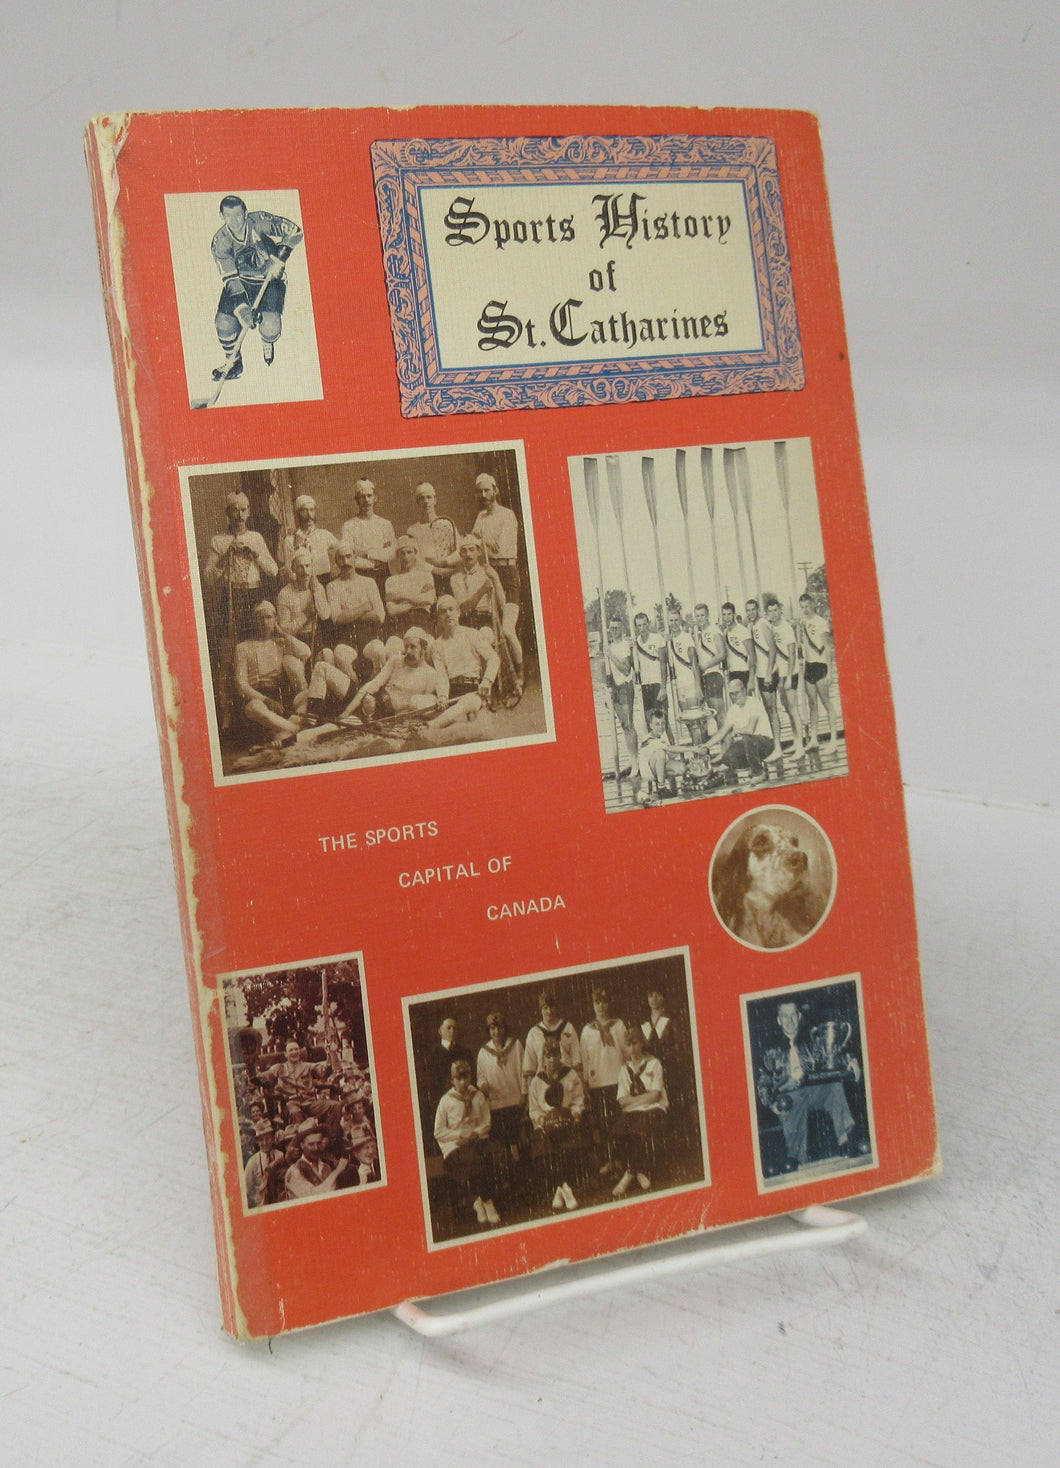 Sports History of St. Catharines